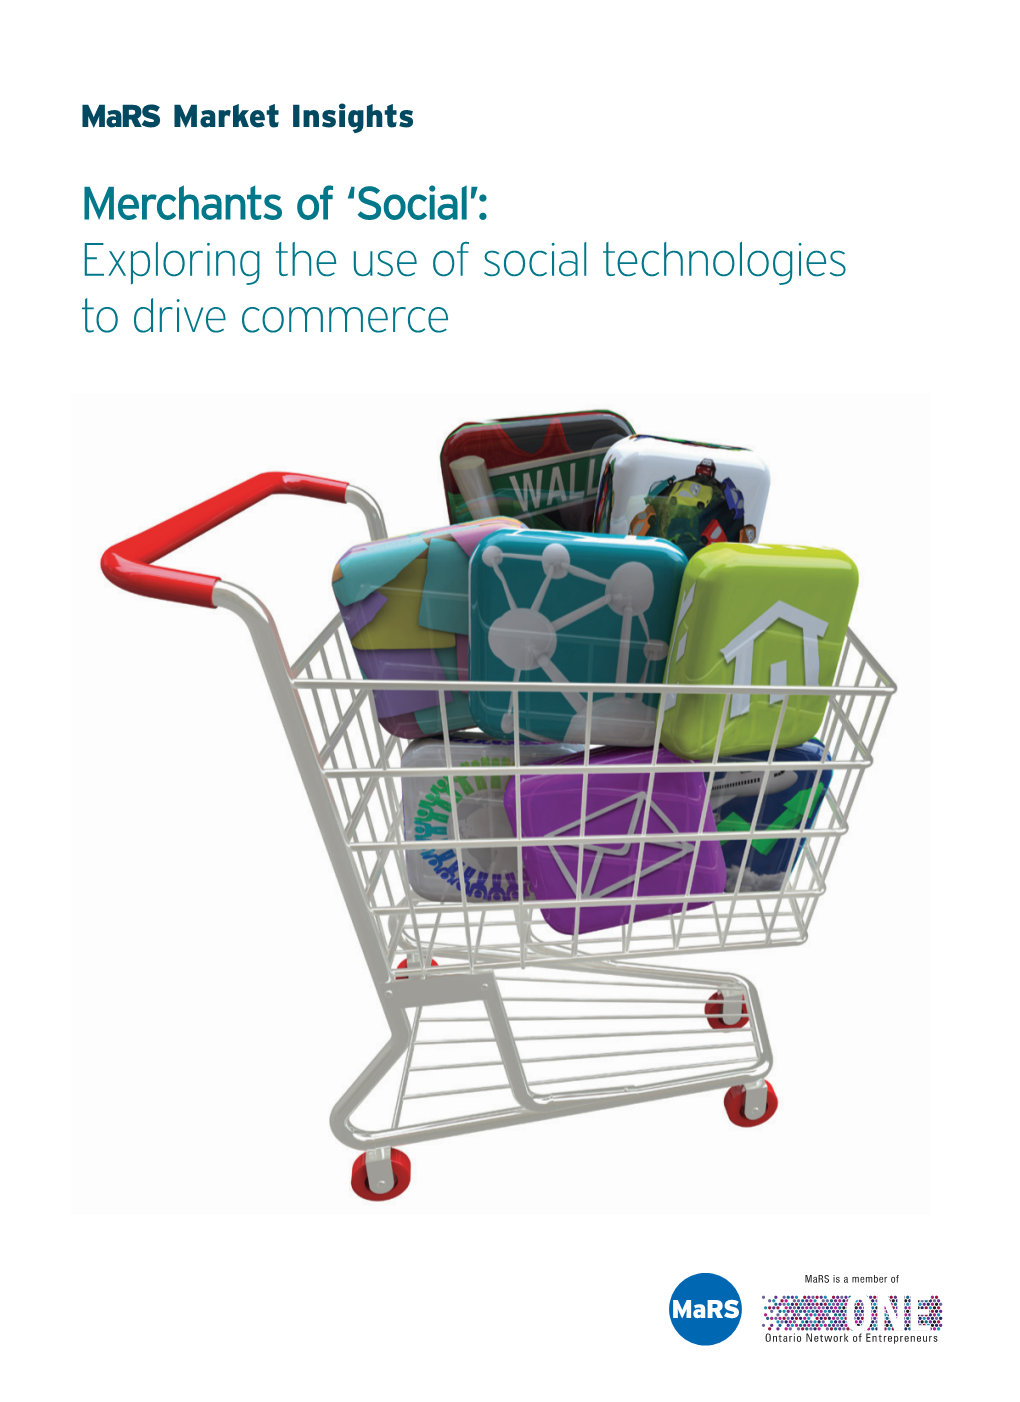 Merchants of 'Social': Exploring the Use of Social Technologies to Drive Commerce